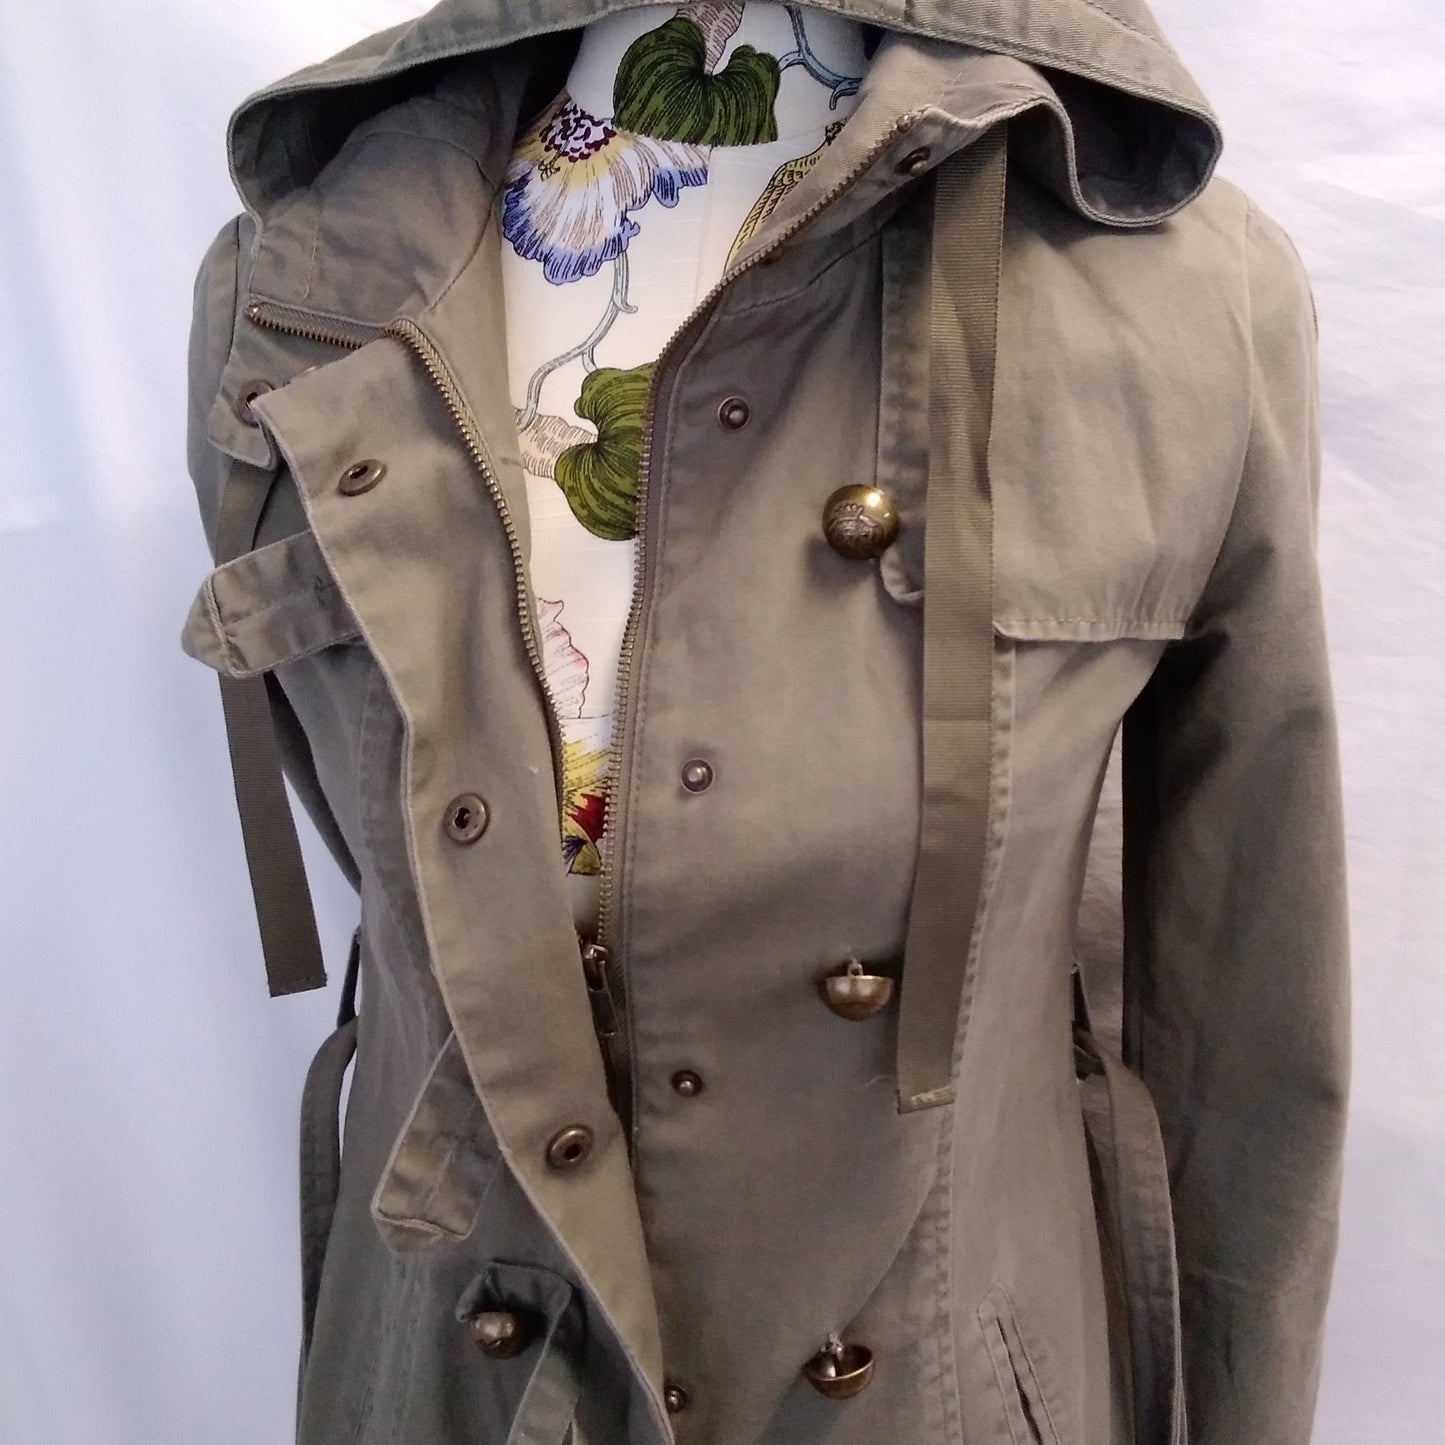 Anthropologie - Idra - Frill Force Button Down Army Green Hooded Jacket - Size: 0